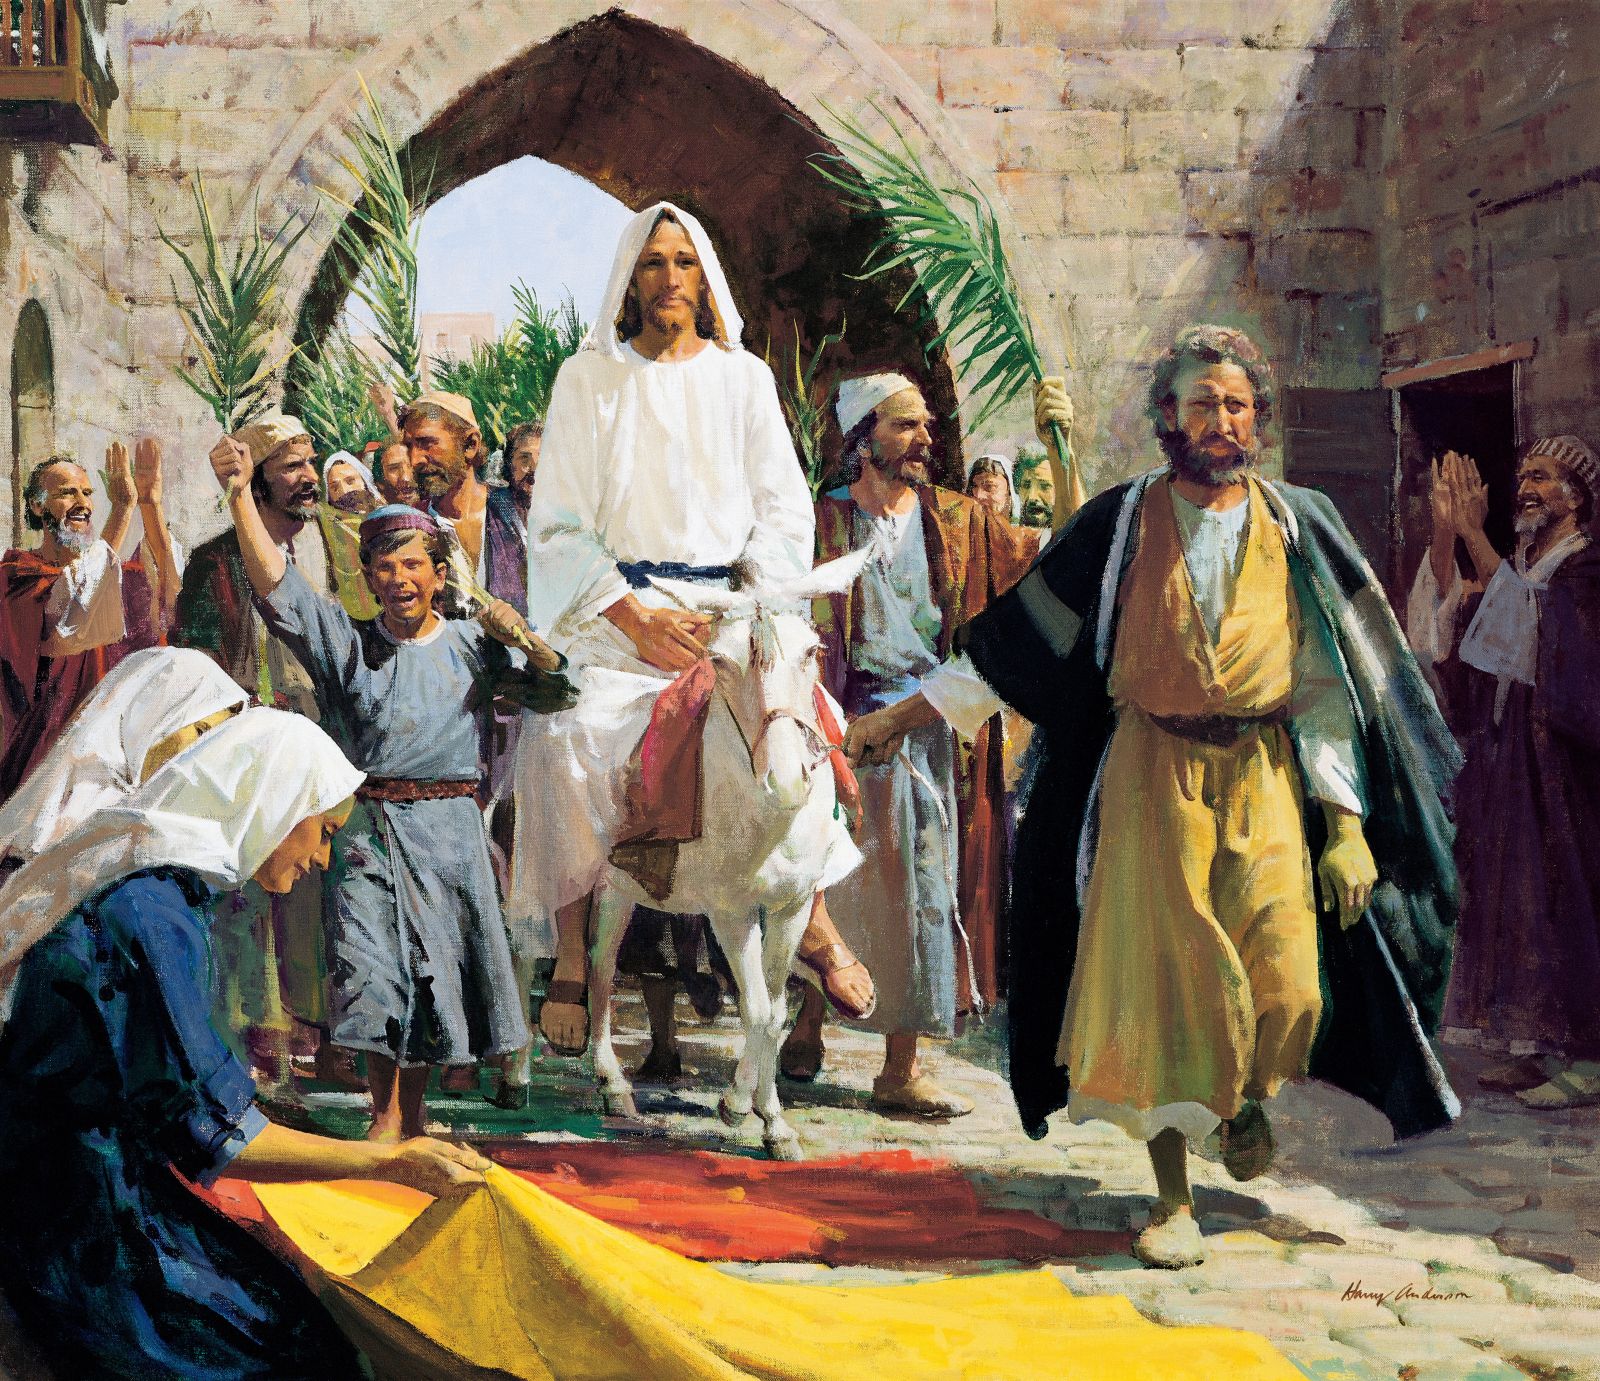 'Triumphal Entry (Christ’s Triumphal Entry into Jerusalem)' by Harry Anderson